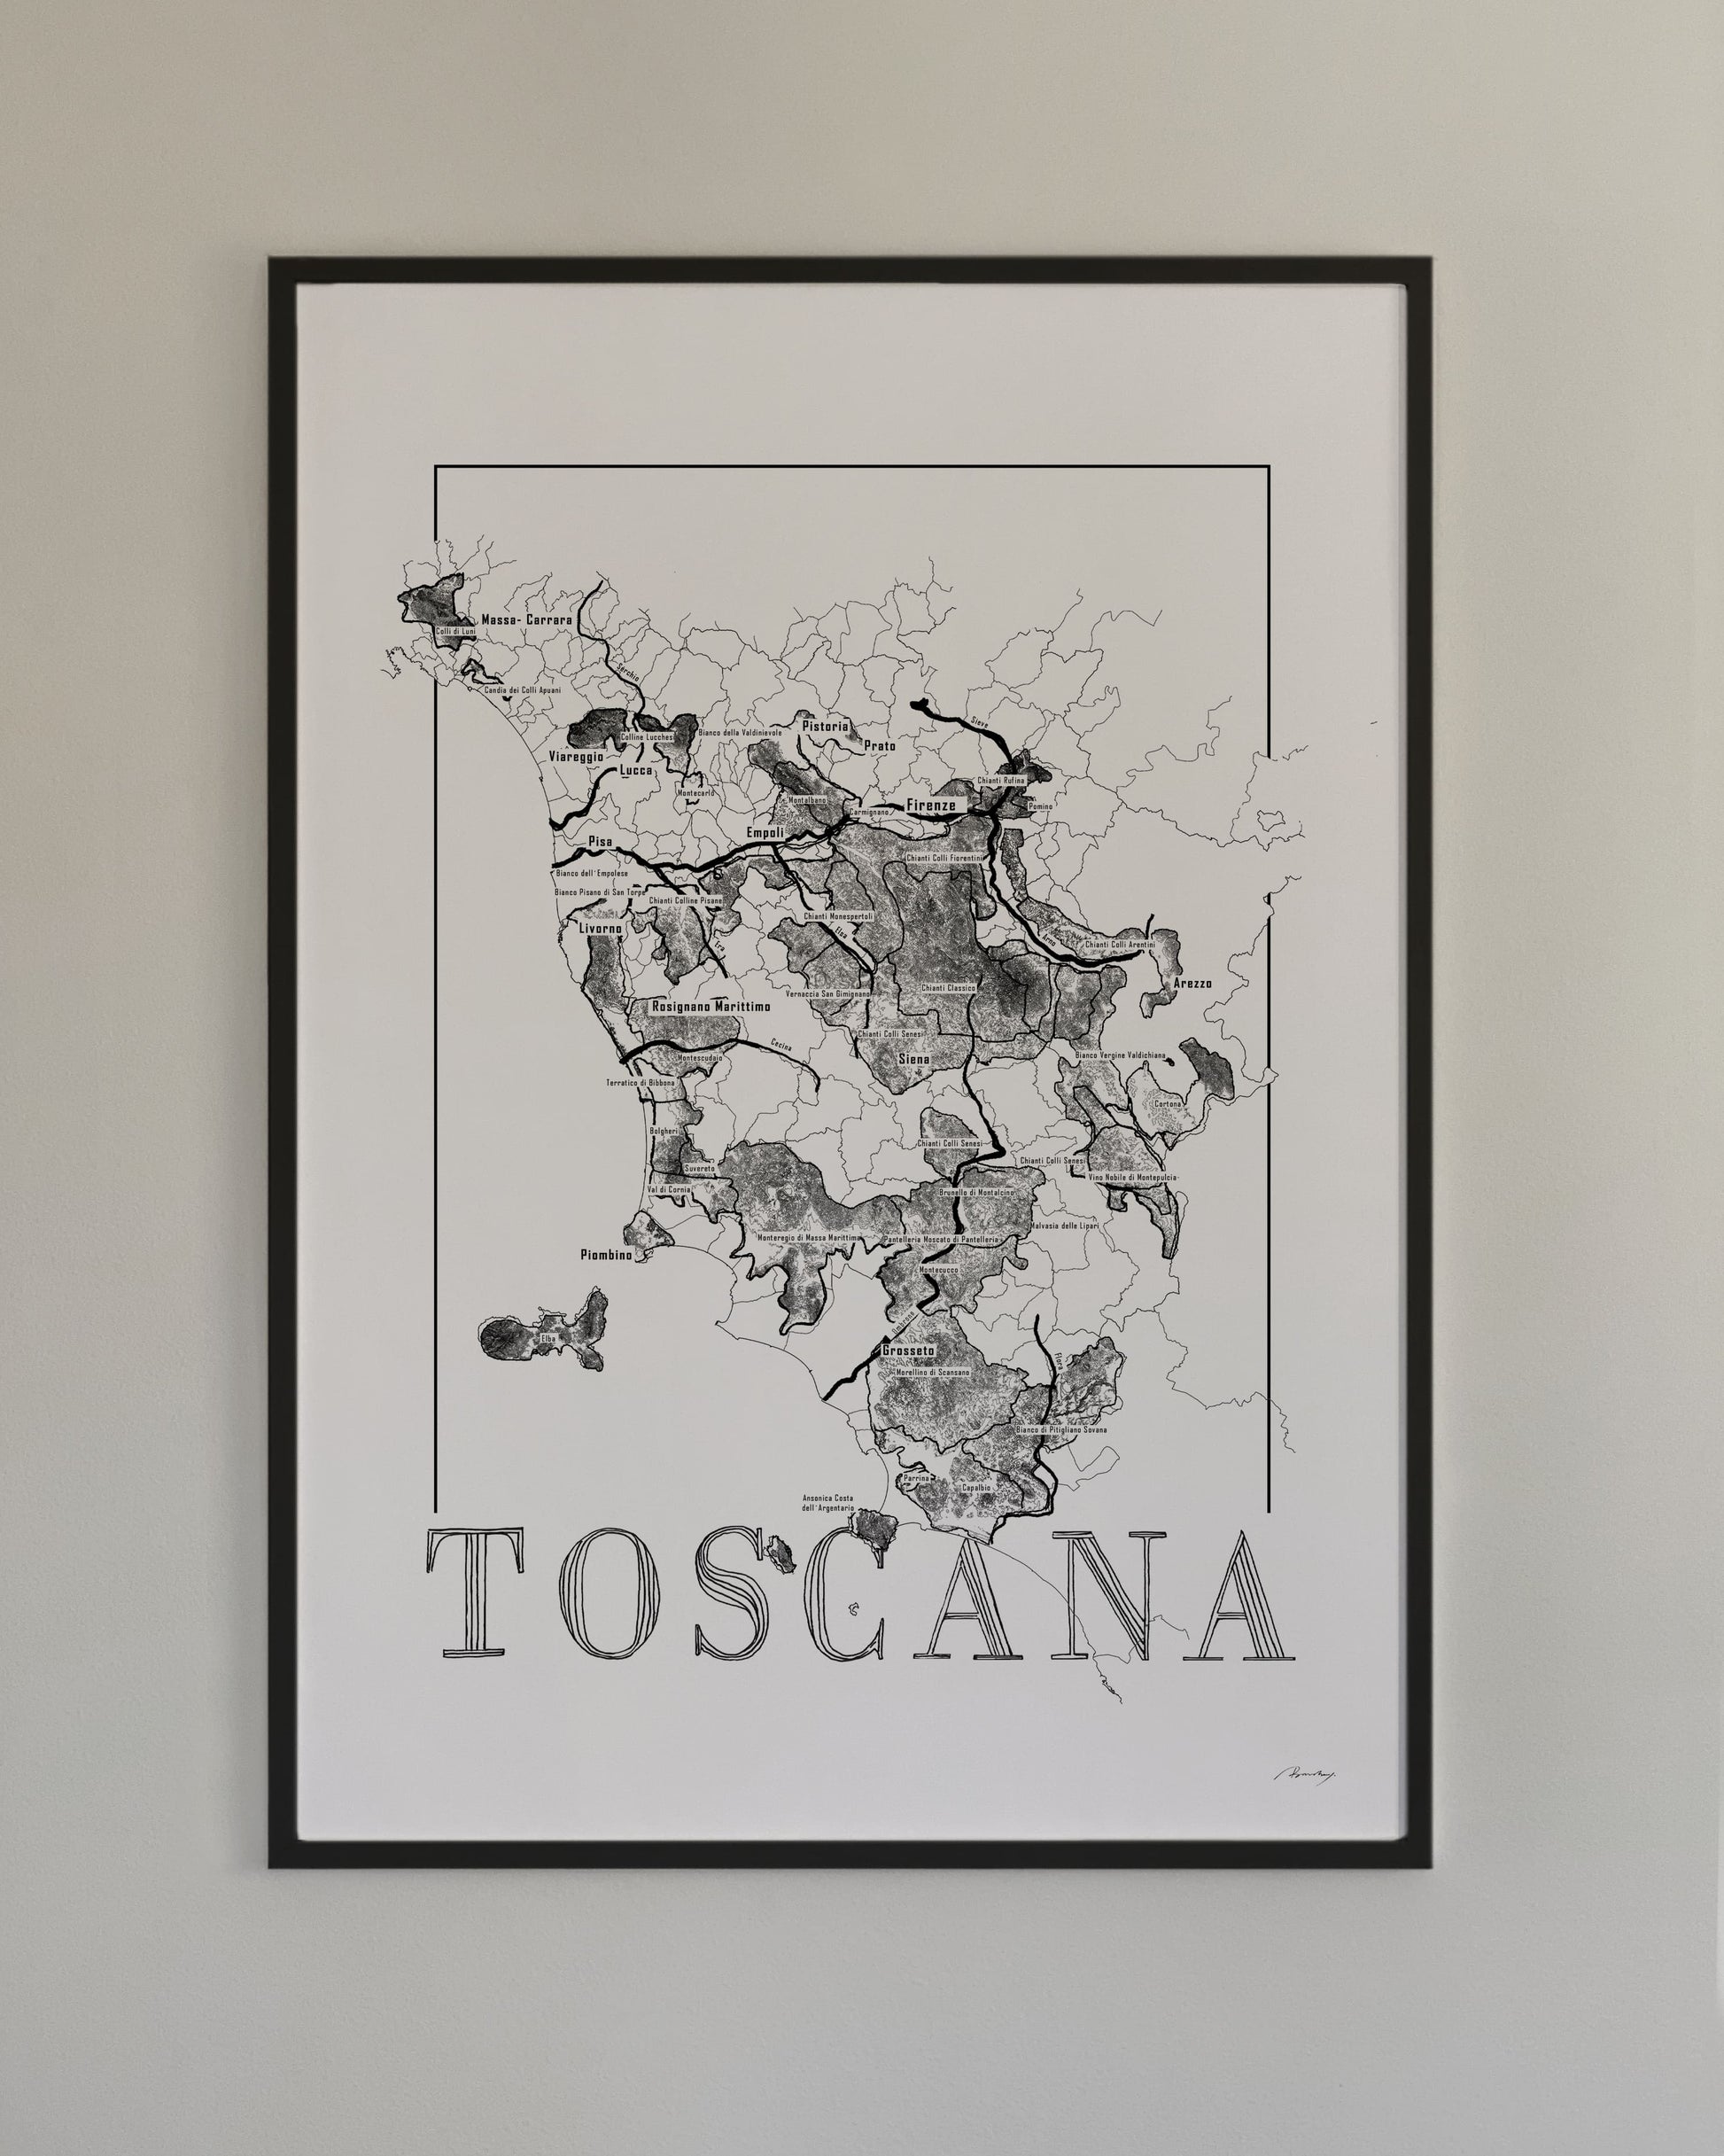 Italy Wine map poster set. Exclusive wine map posters. Premium quality wine maps printed on environmentally friendly FSC marked paper. 